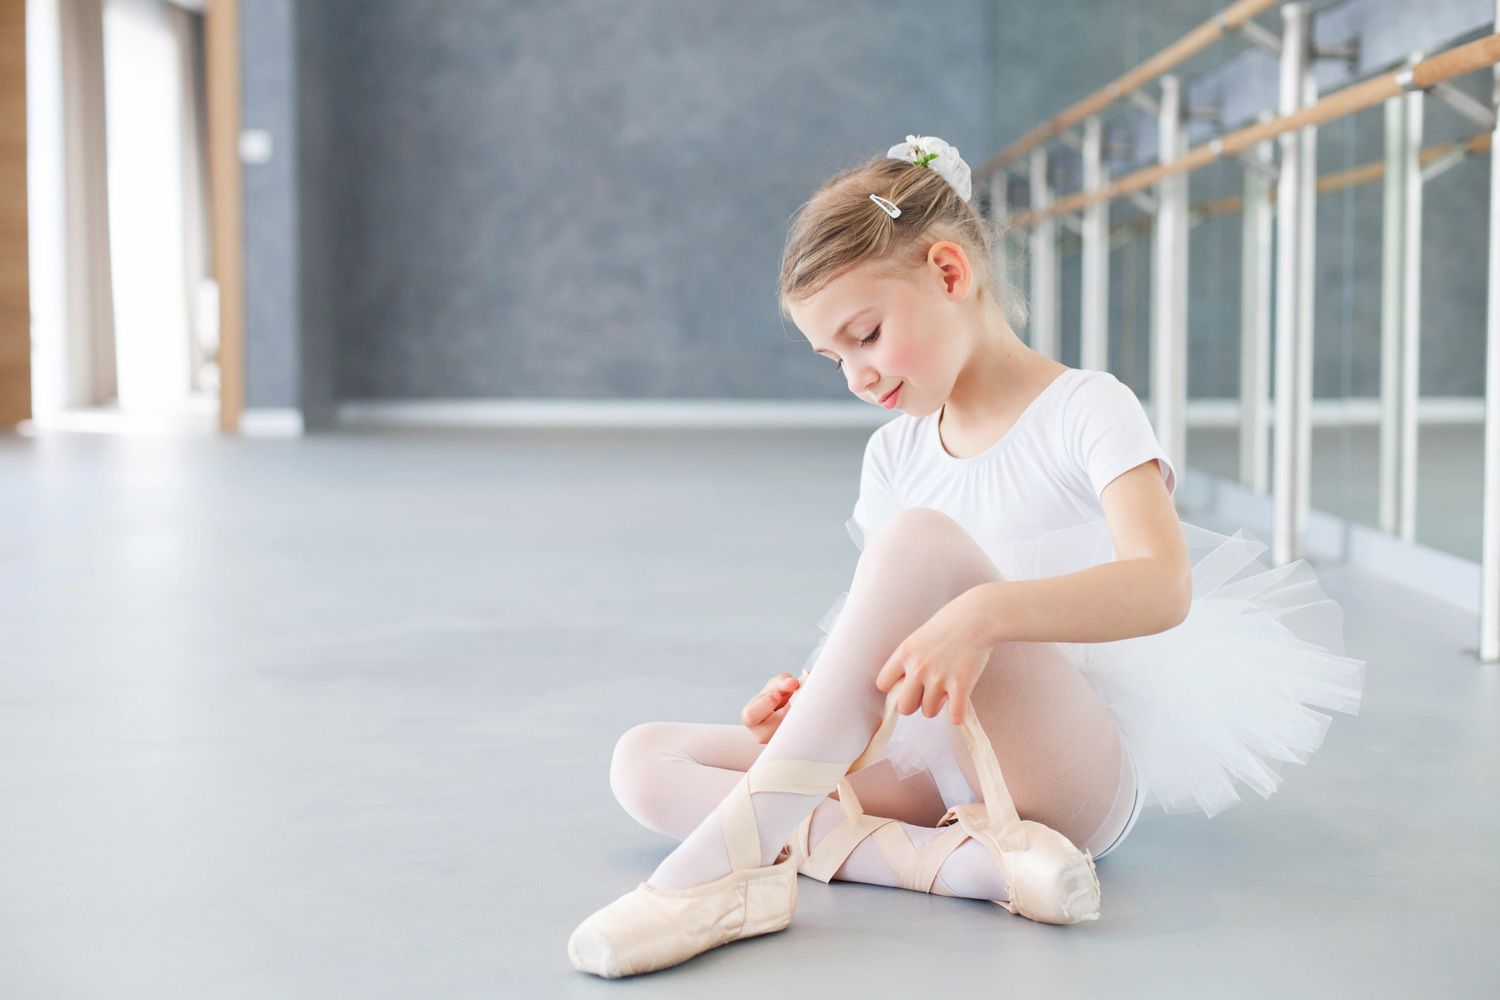 How To Make Ballet Shoes With Socks